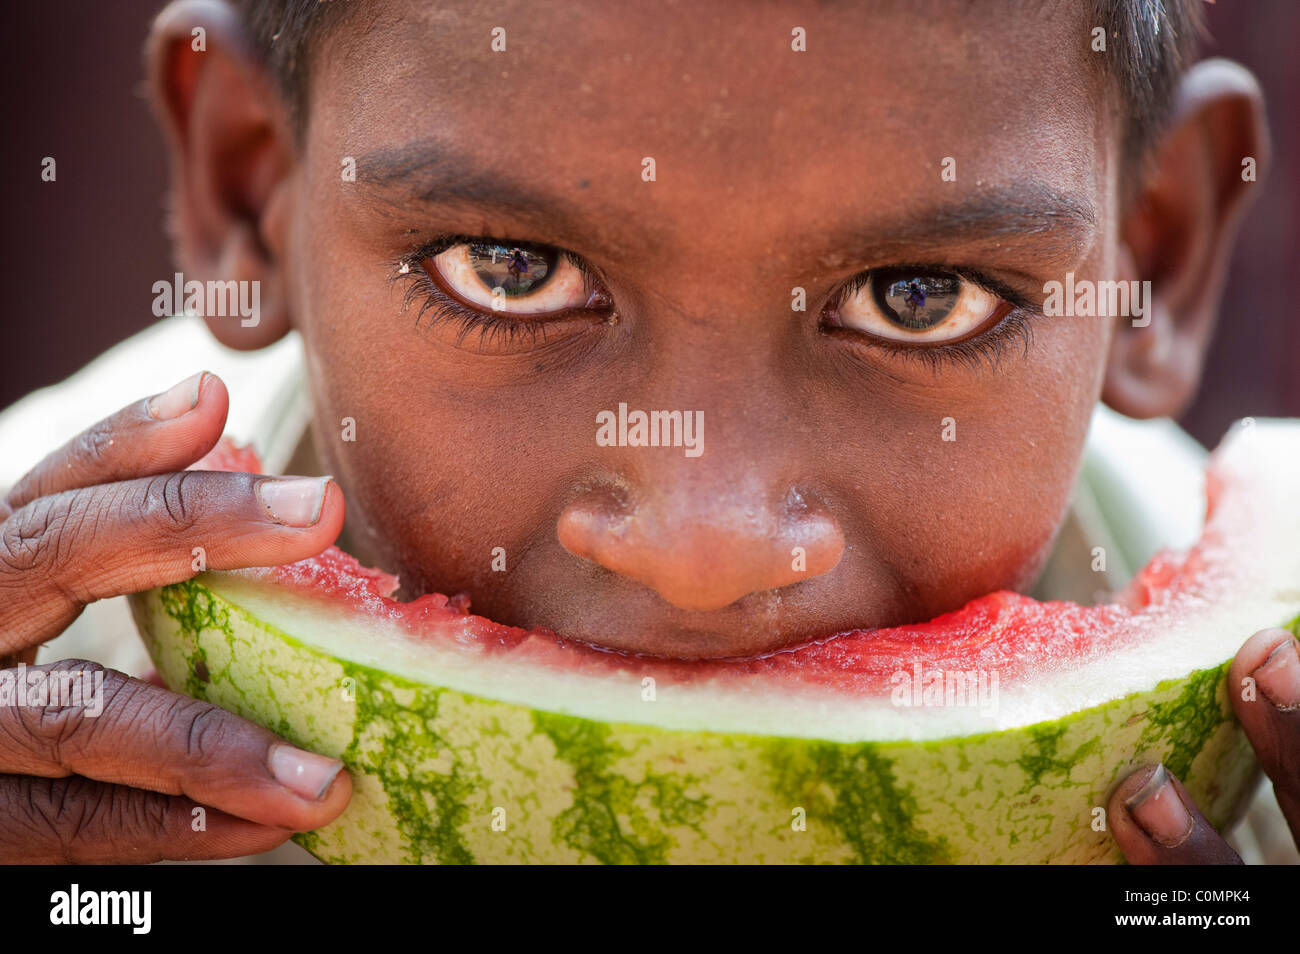 Happy young poor lower caste Indian street boy eating a slice of watermelon. Close up selective focus Stock Photo